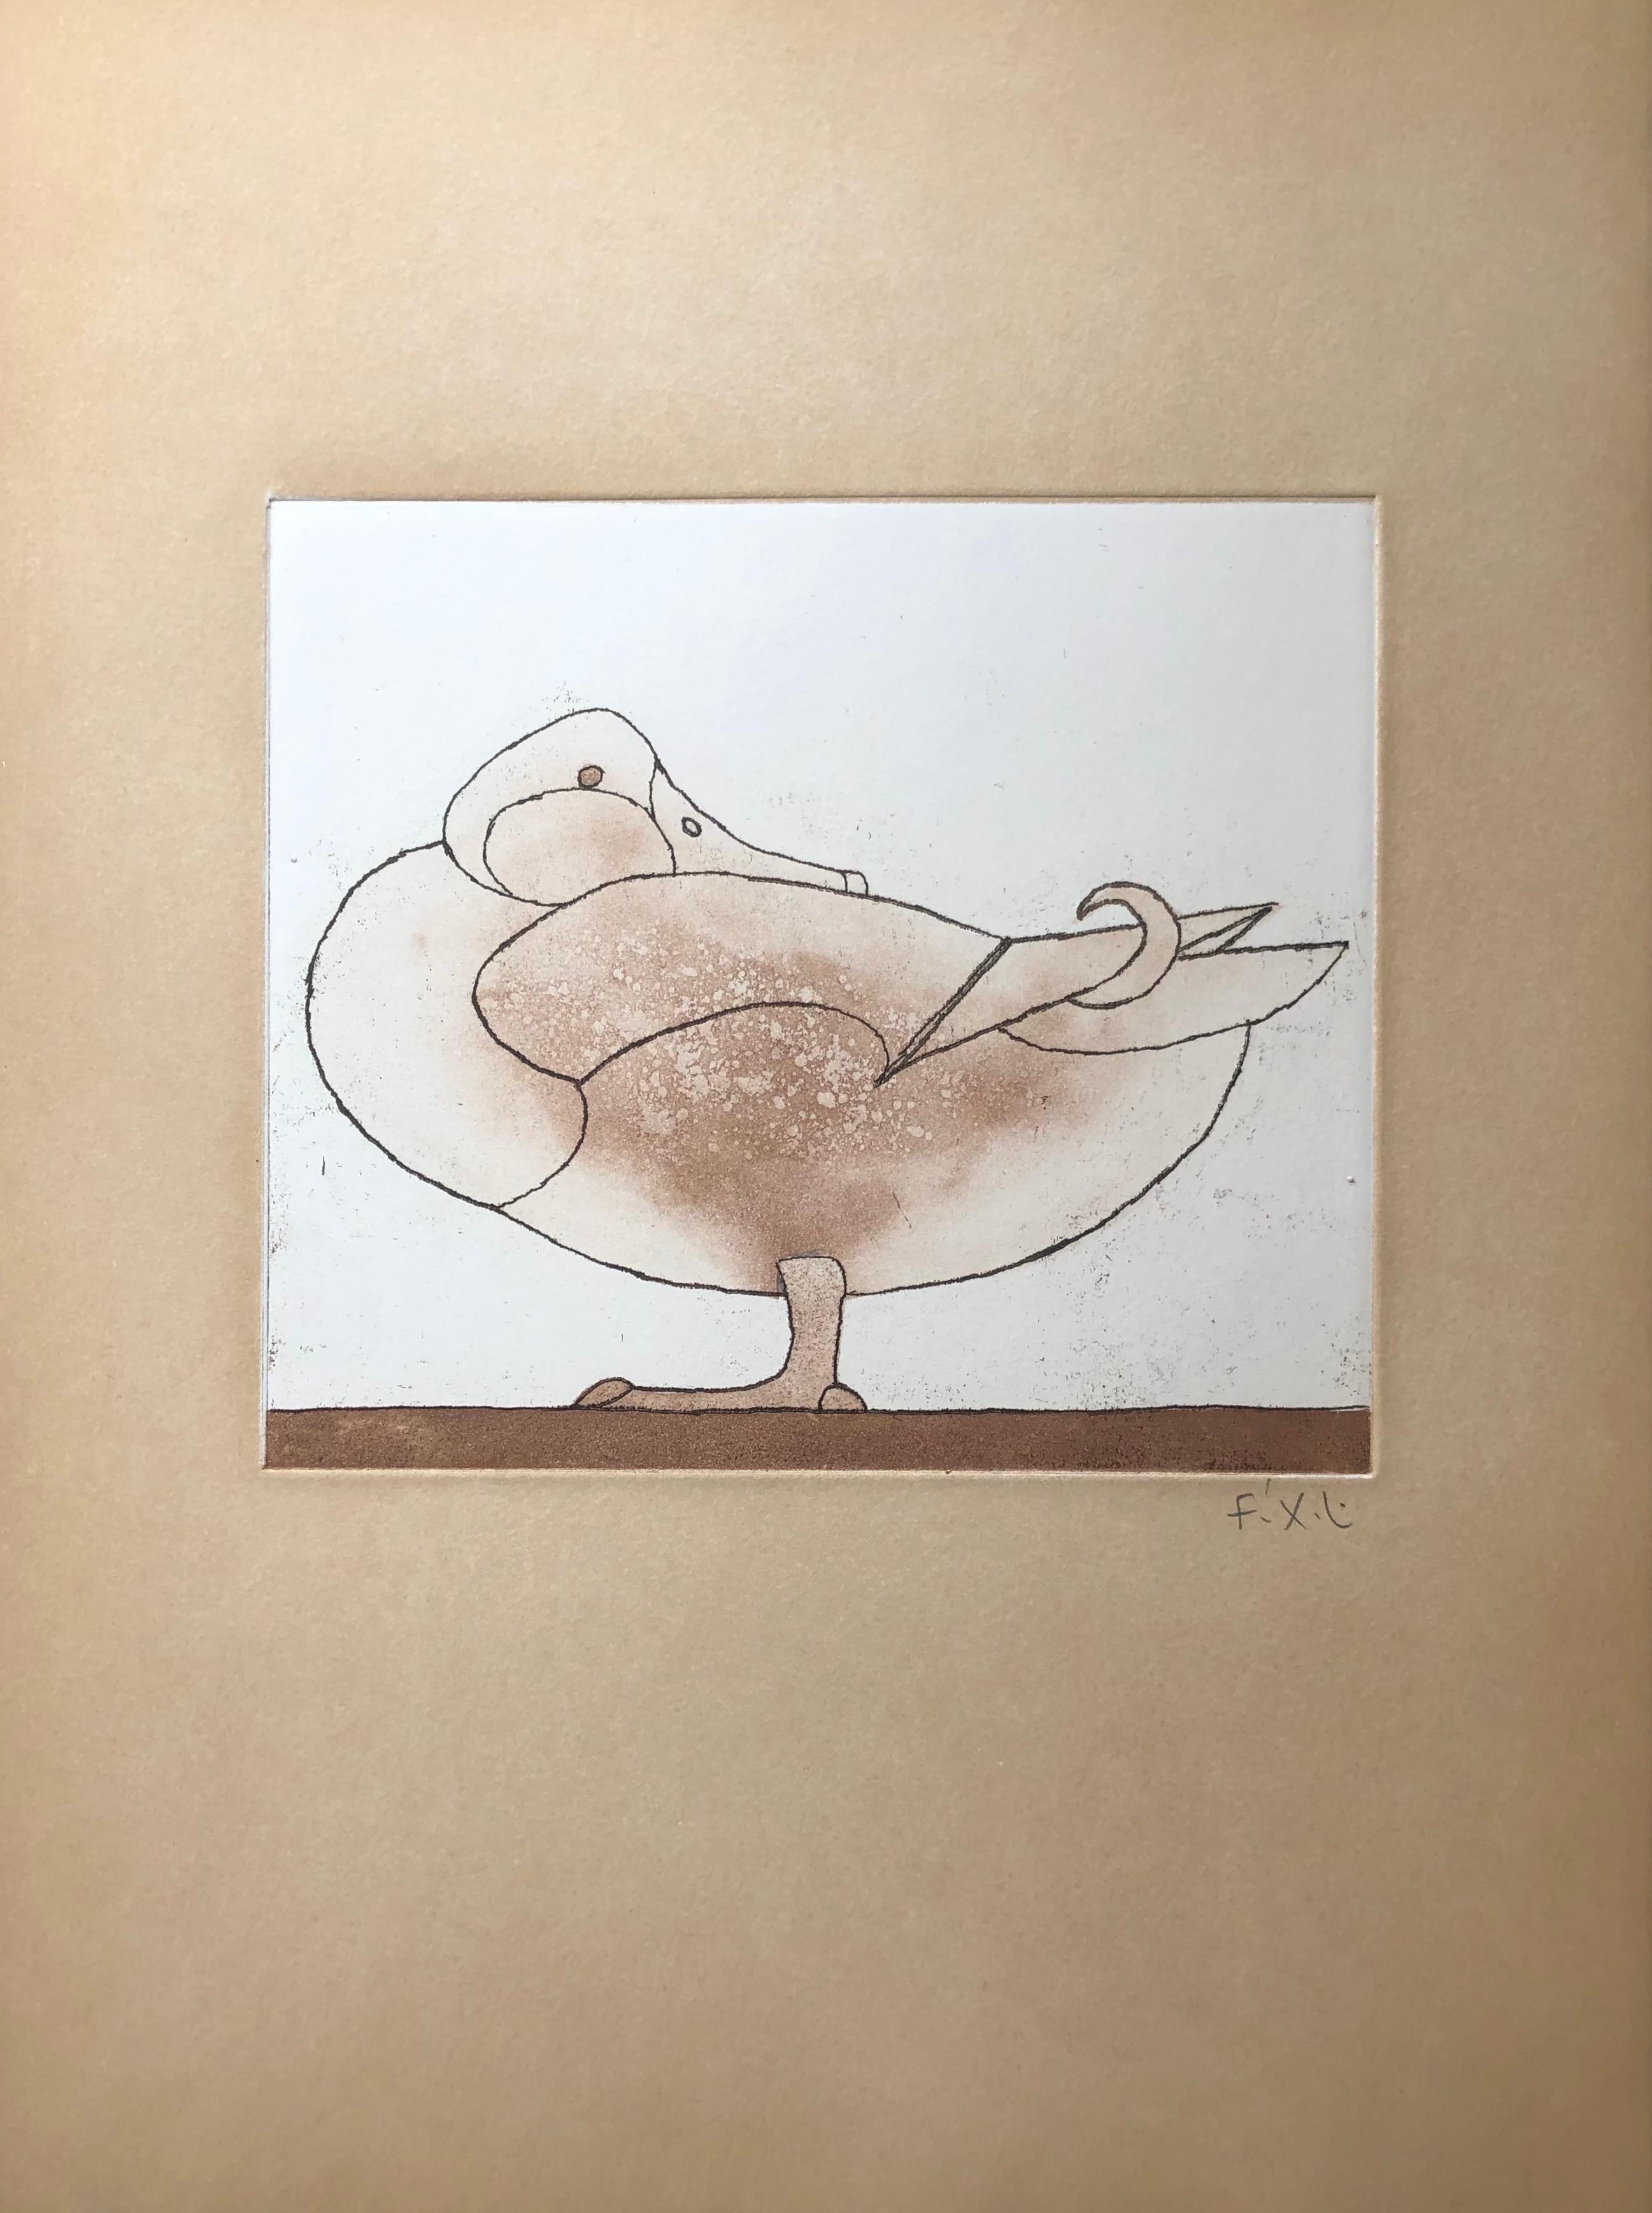 Francois-Xavier Lalanne (1927-2008) Le Canard, 2004

Original print (aquatint and soft varnish) hand signed in pencil by François Xavier Lalanne and untitled "Le Canard" ("The Duck"), in perfect condition
This rare print is a variation over one of